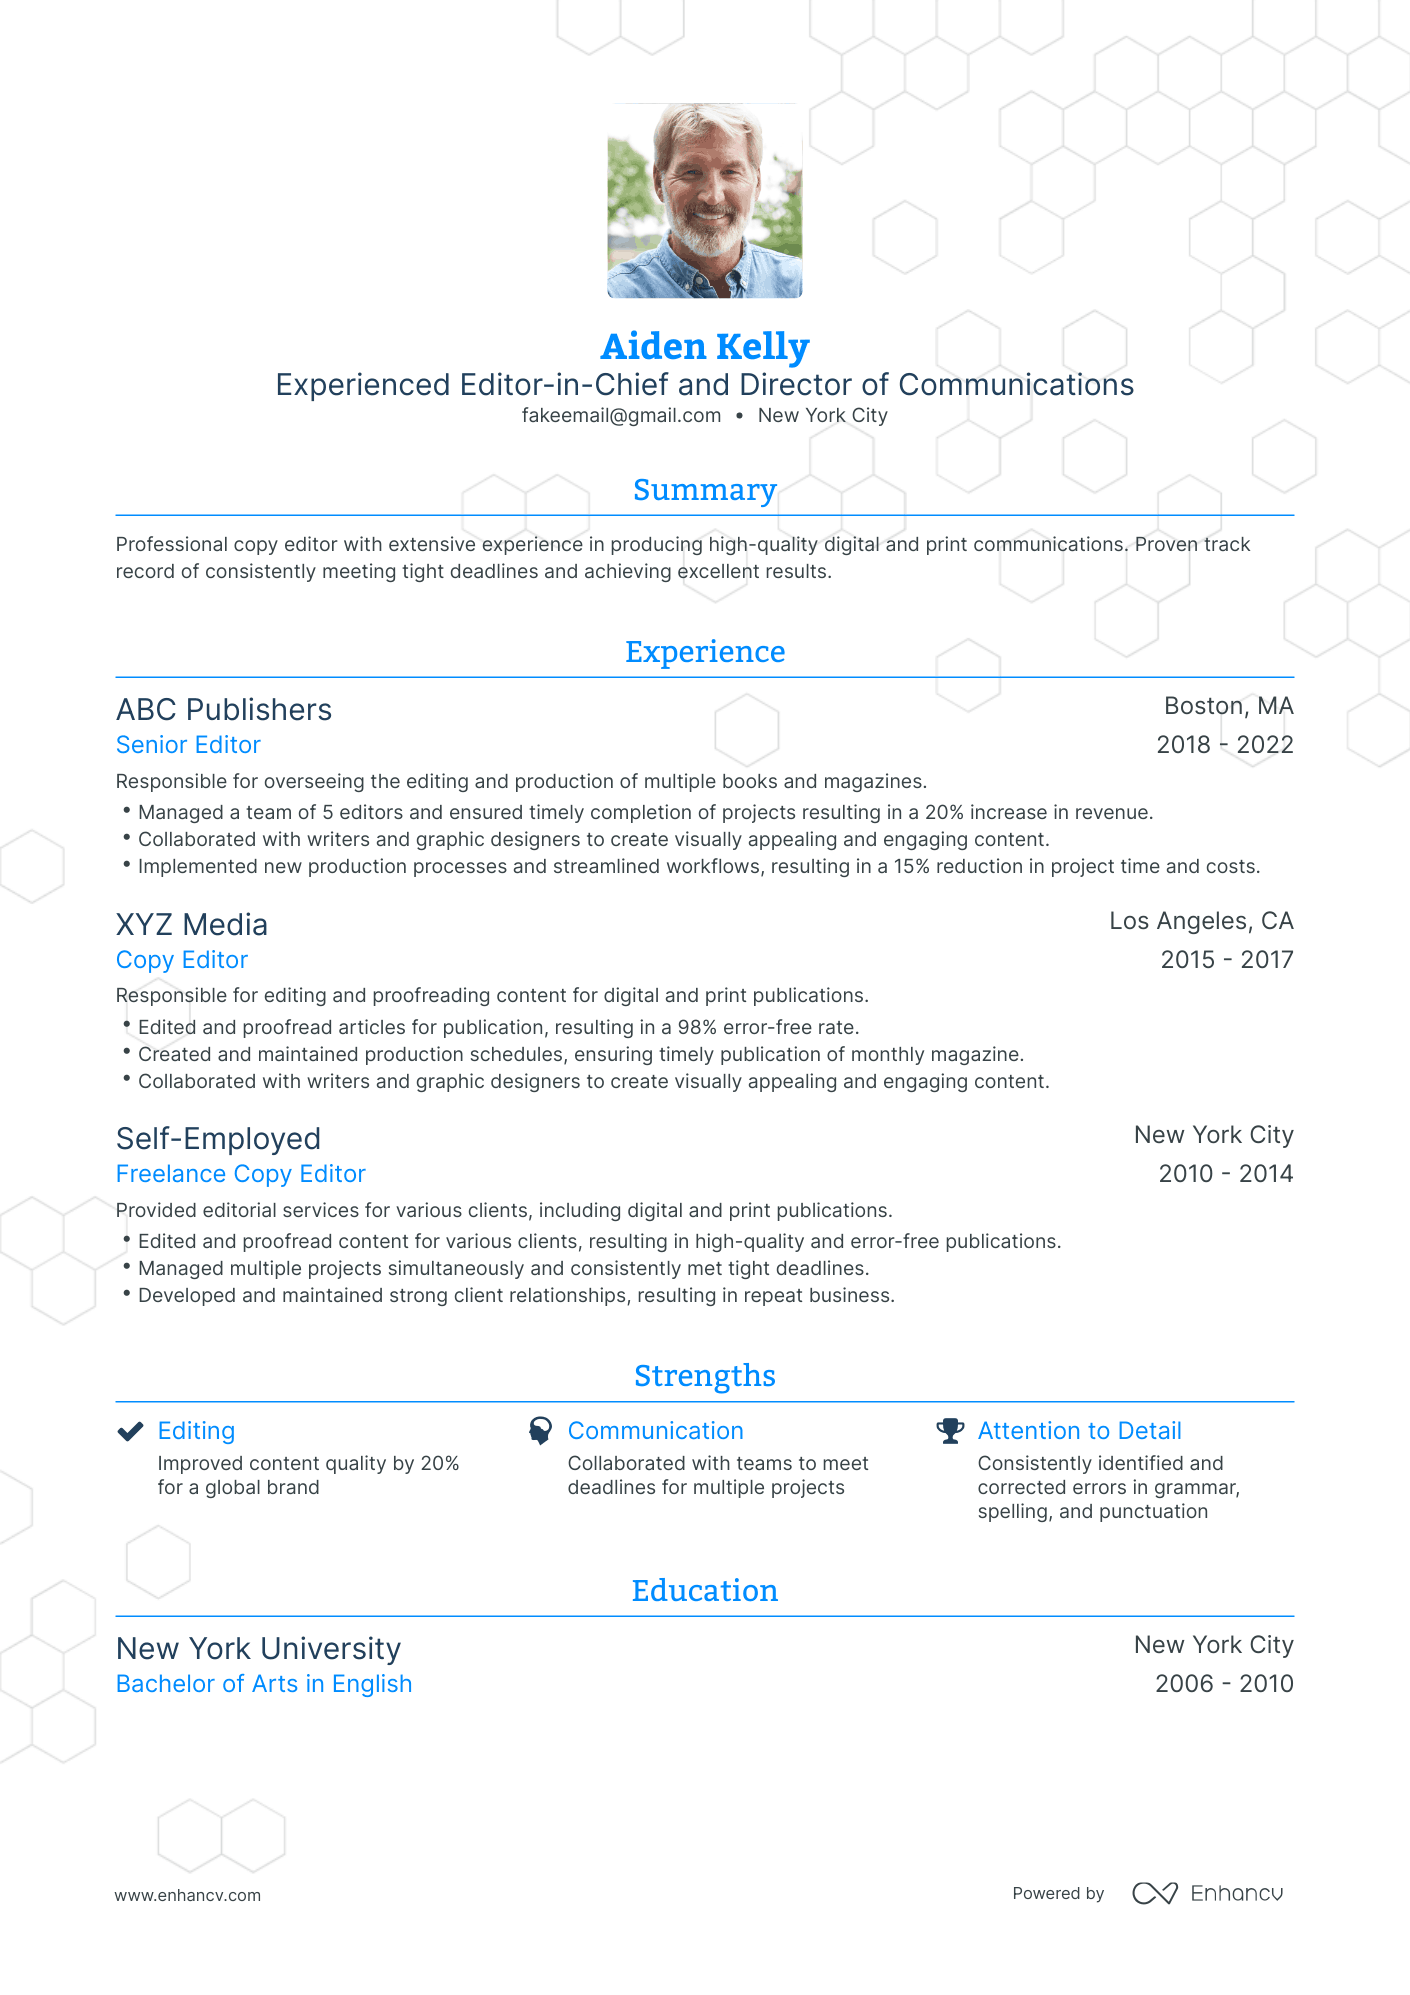 Traditional Freelance Copy Editor Resume Template